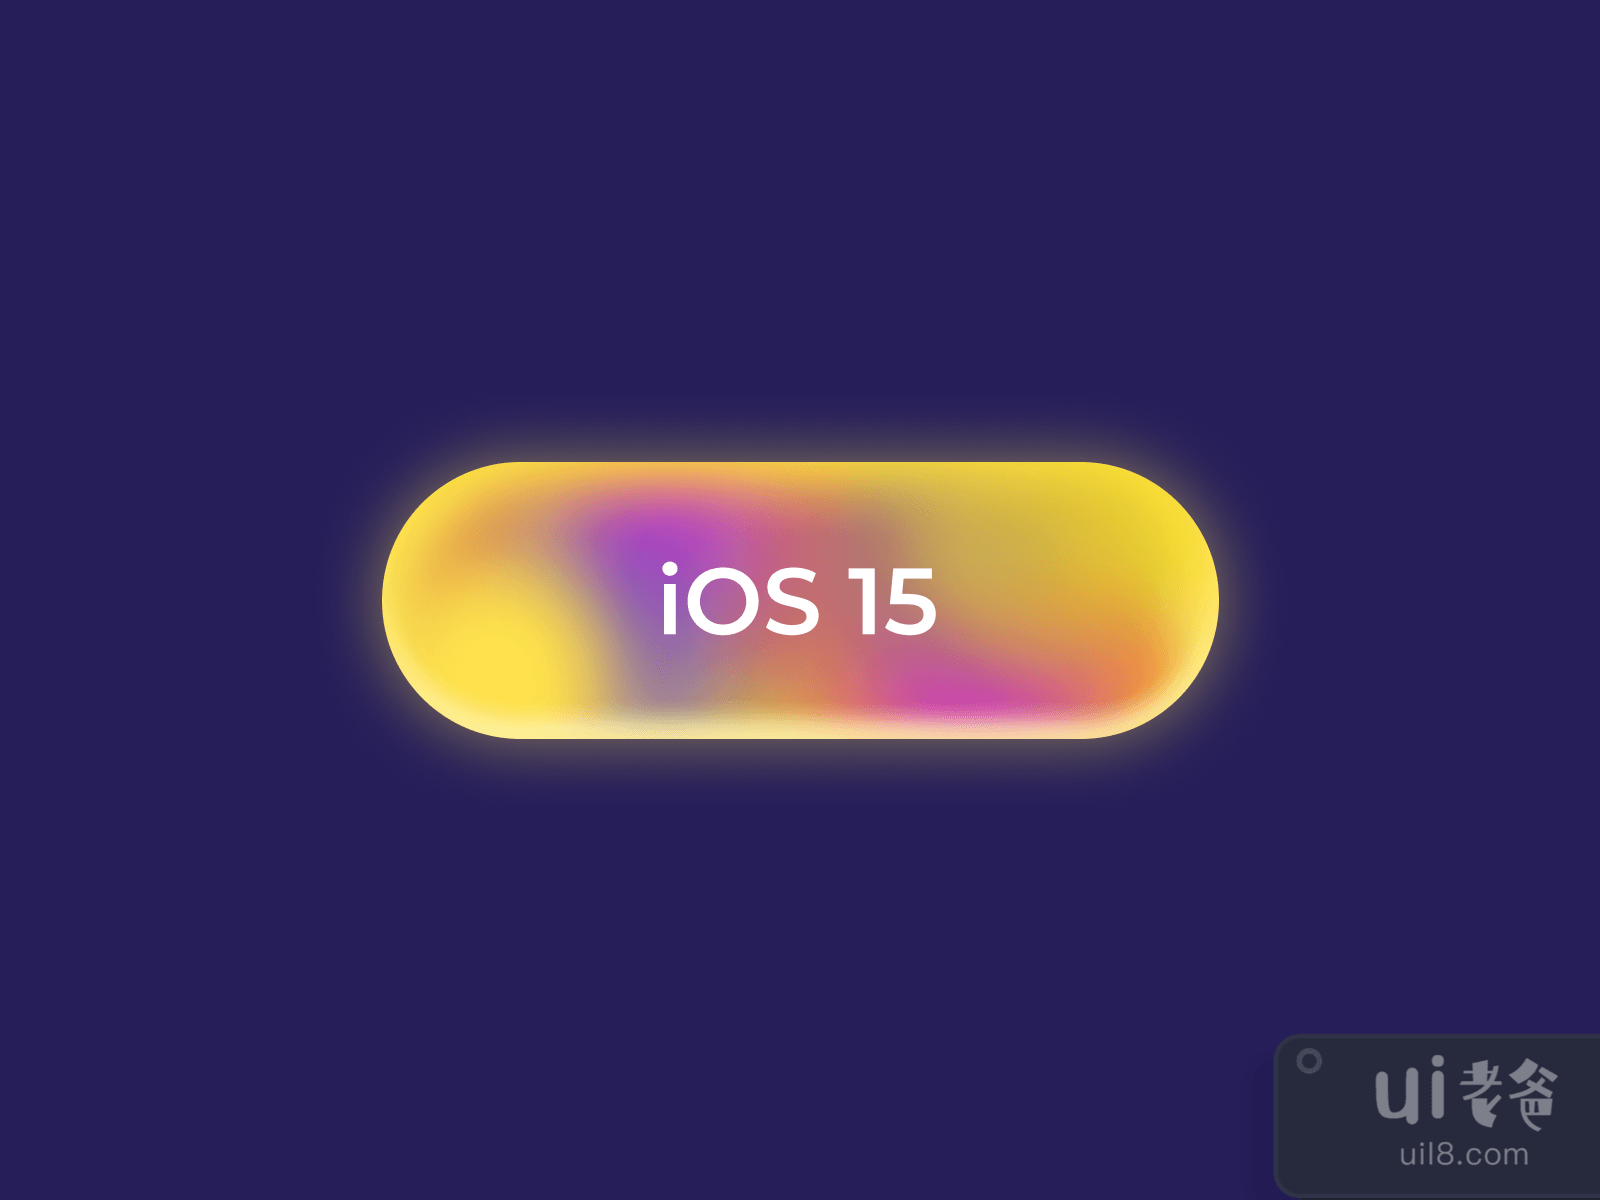 iOS 15 Button for Figma and Adobe XD No 2